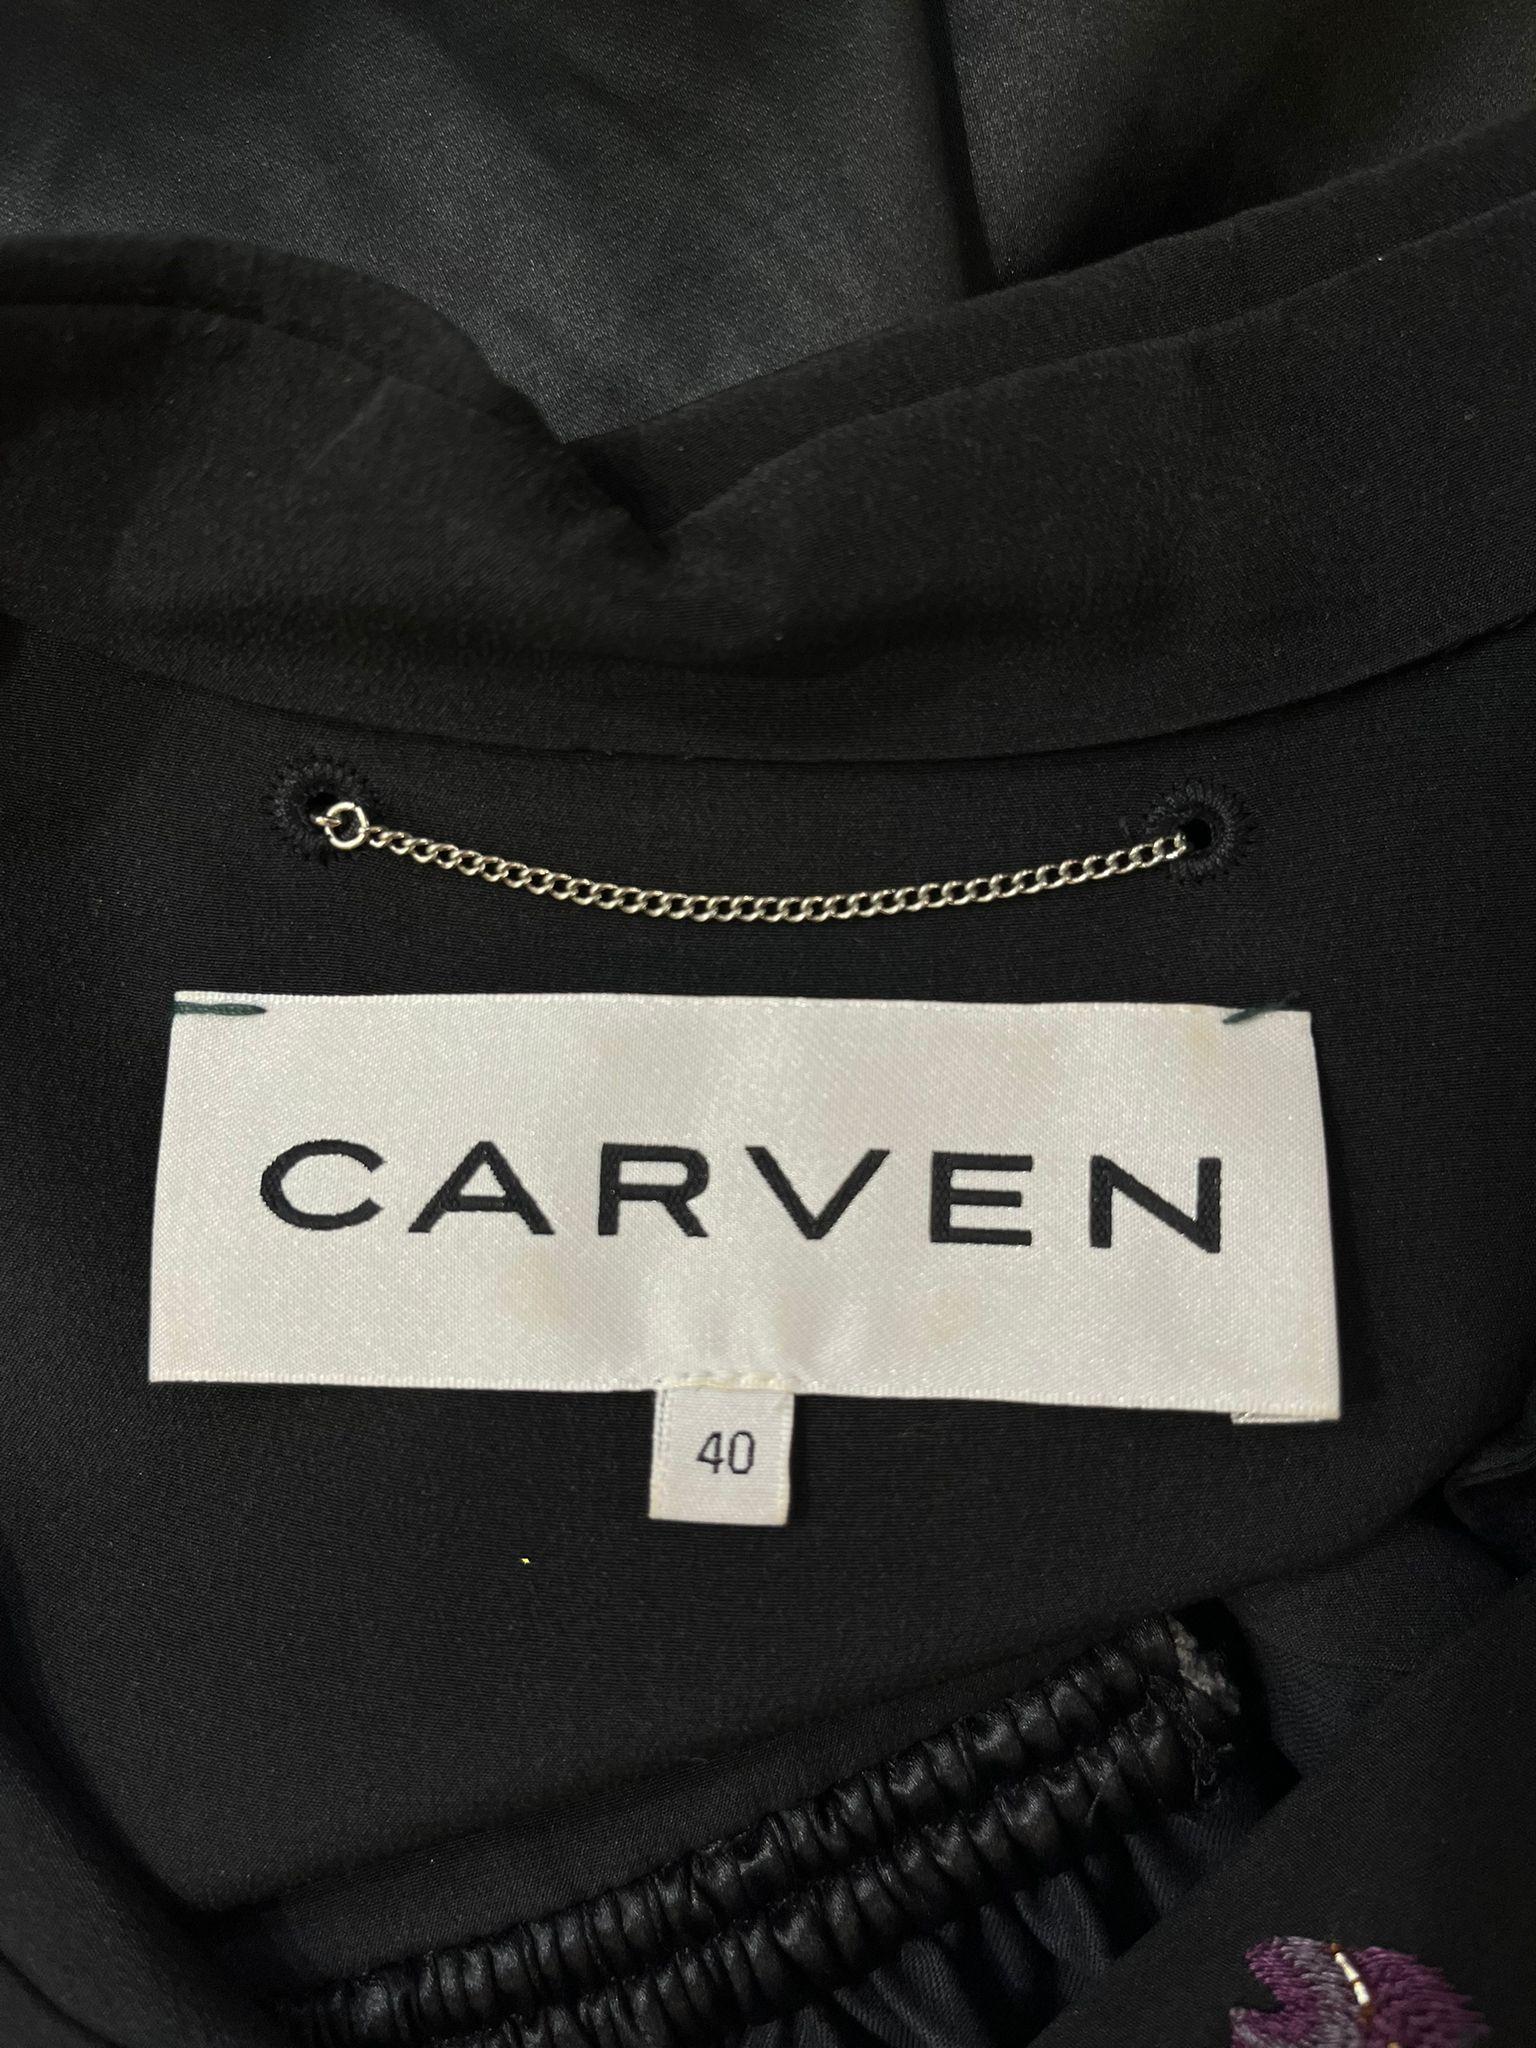 Carven Embroidered Silk & Cotton Dress For Sale 2